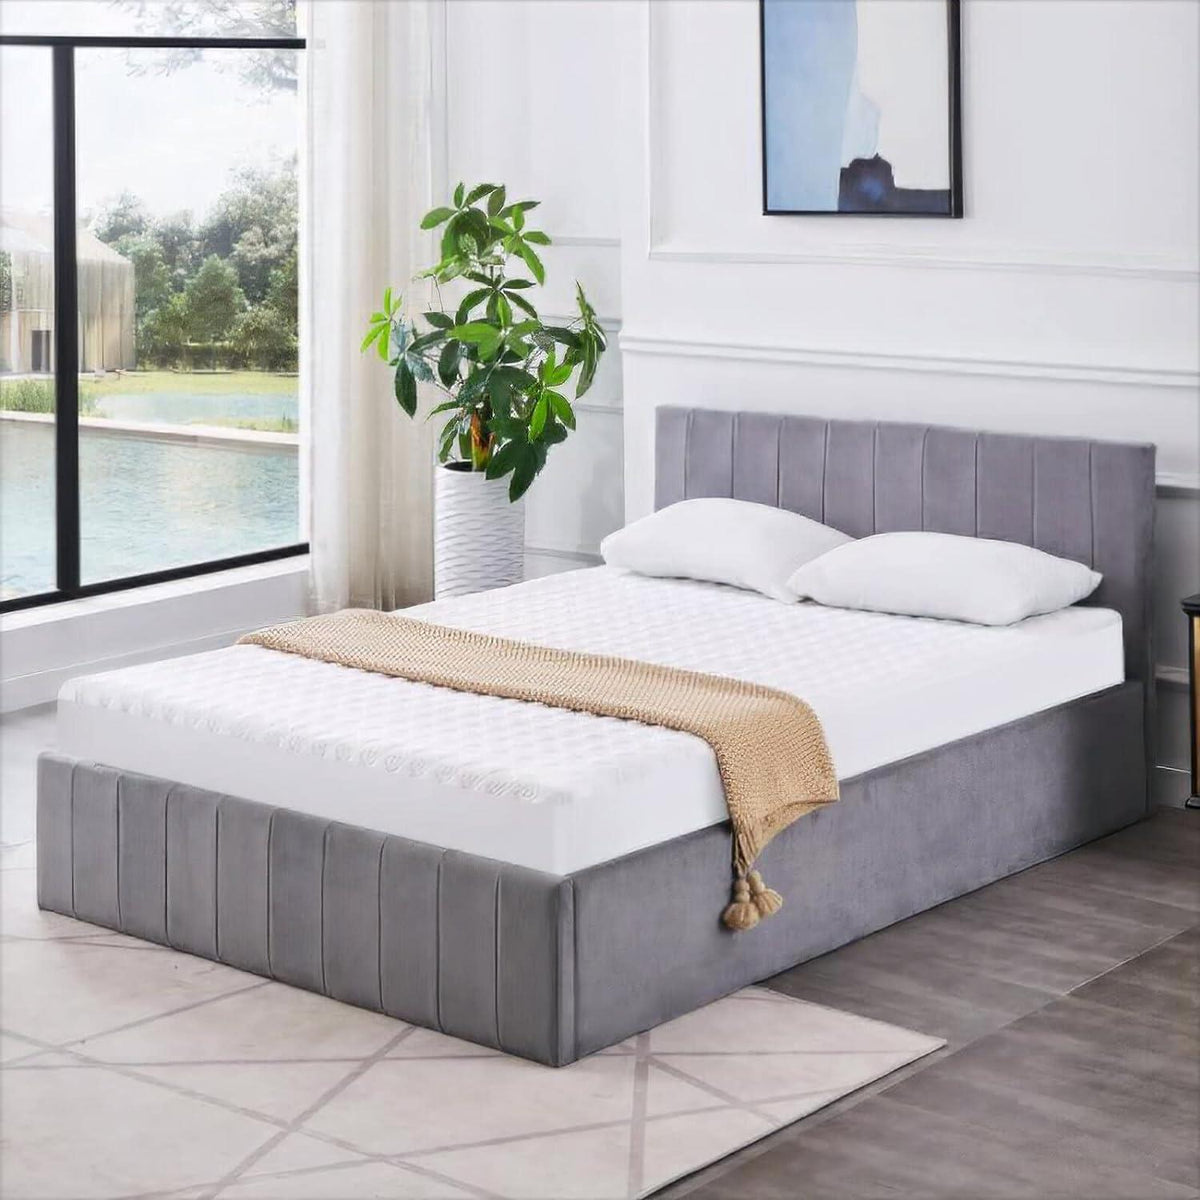 Ottoman Storage Bed grey small double 4ft line pattern fabric velvet bedroom furniture